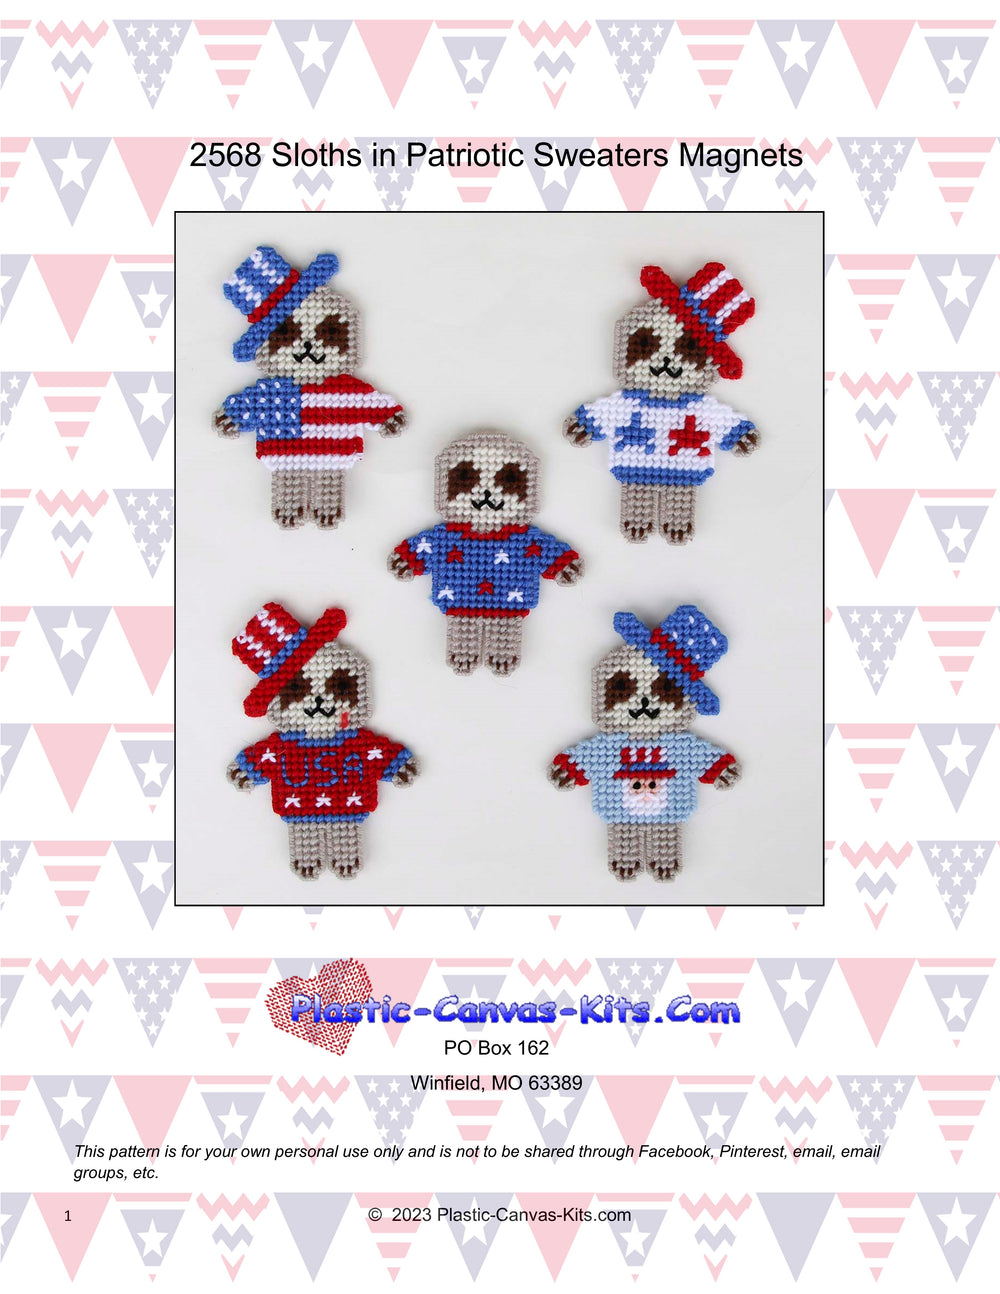 Sloths in Patriotic Sweaters Magnets